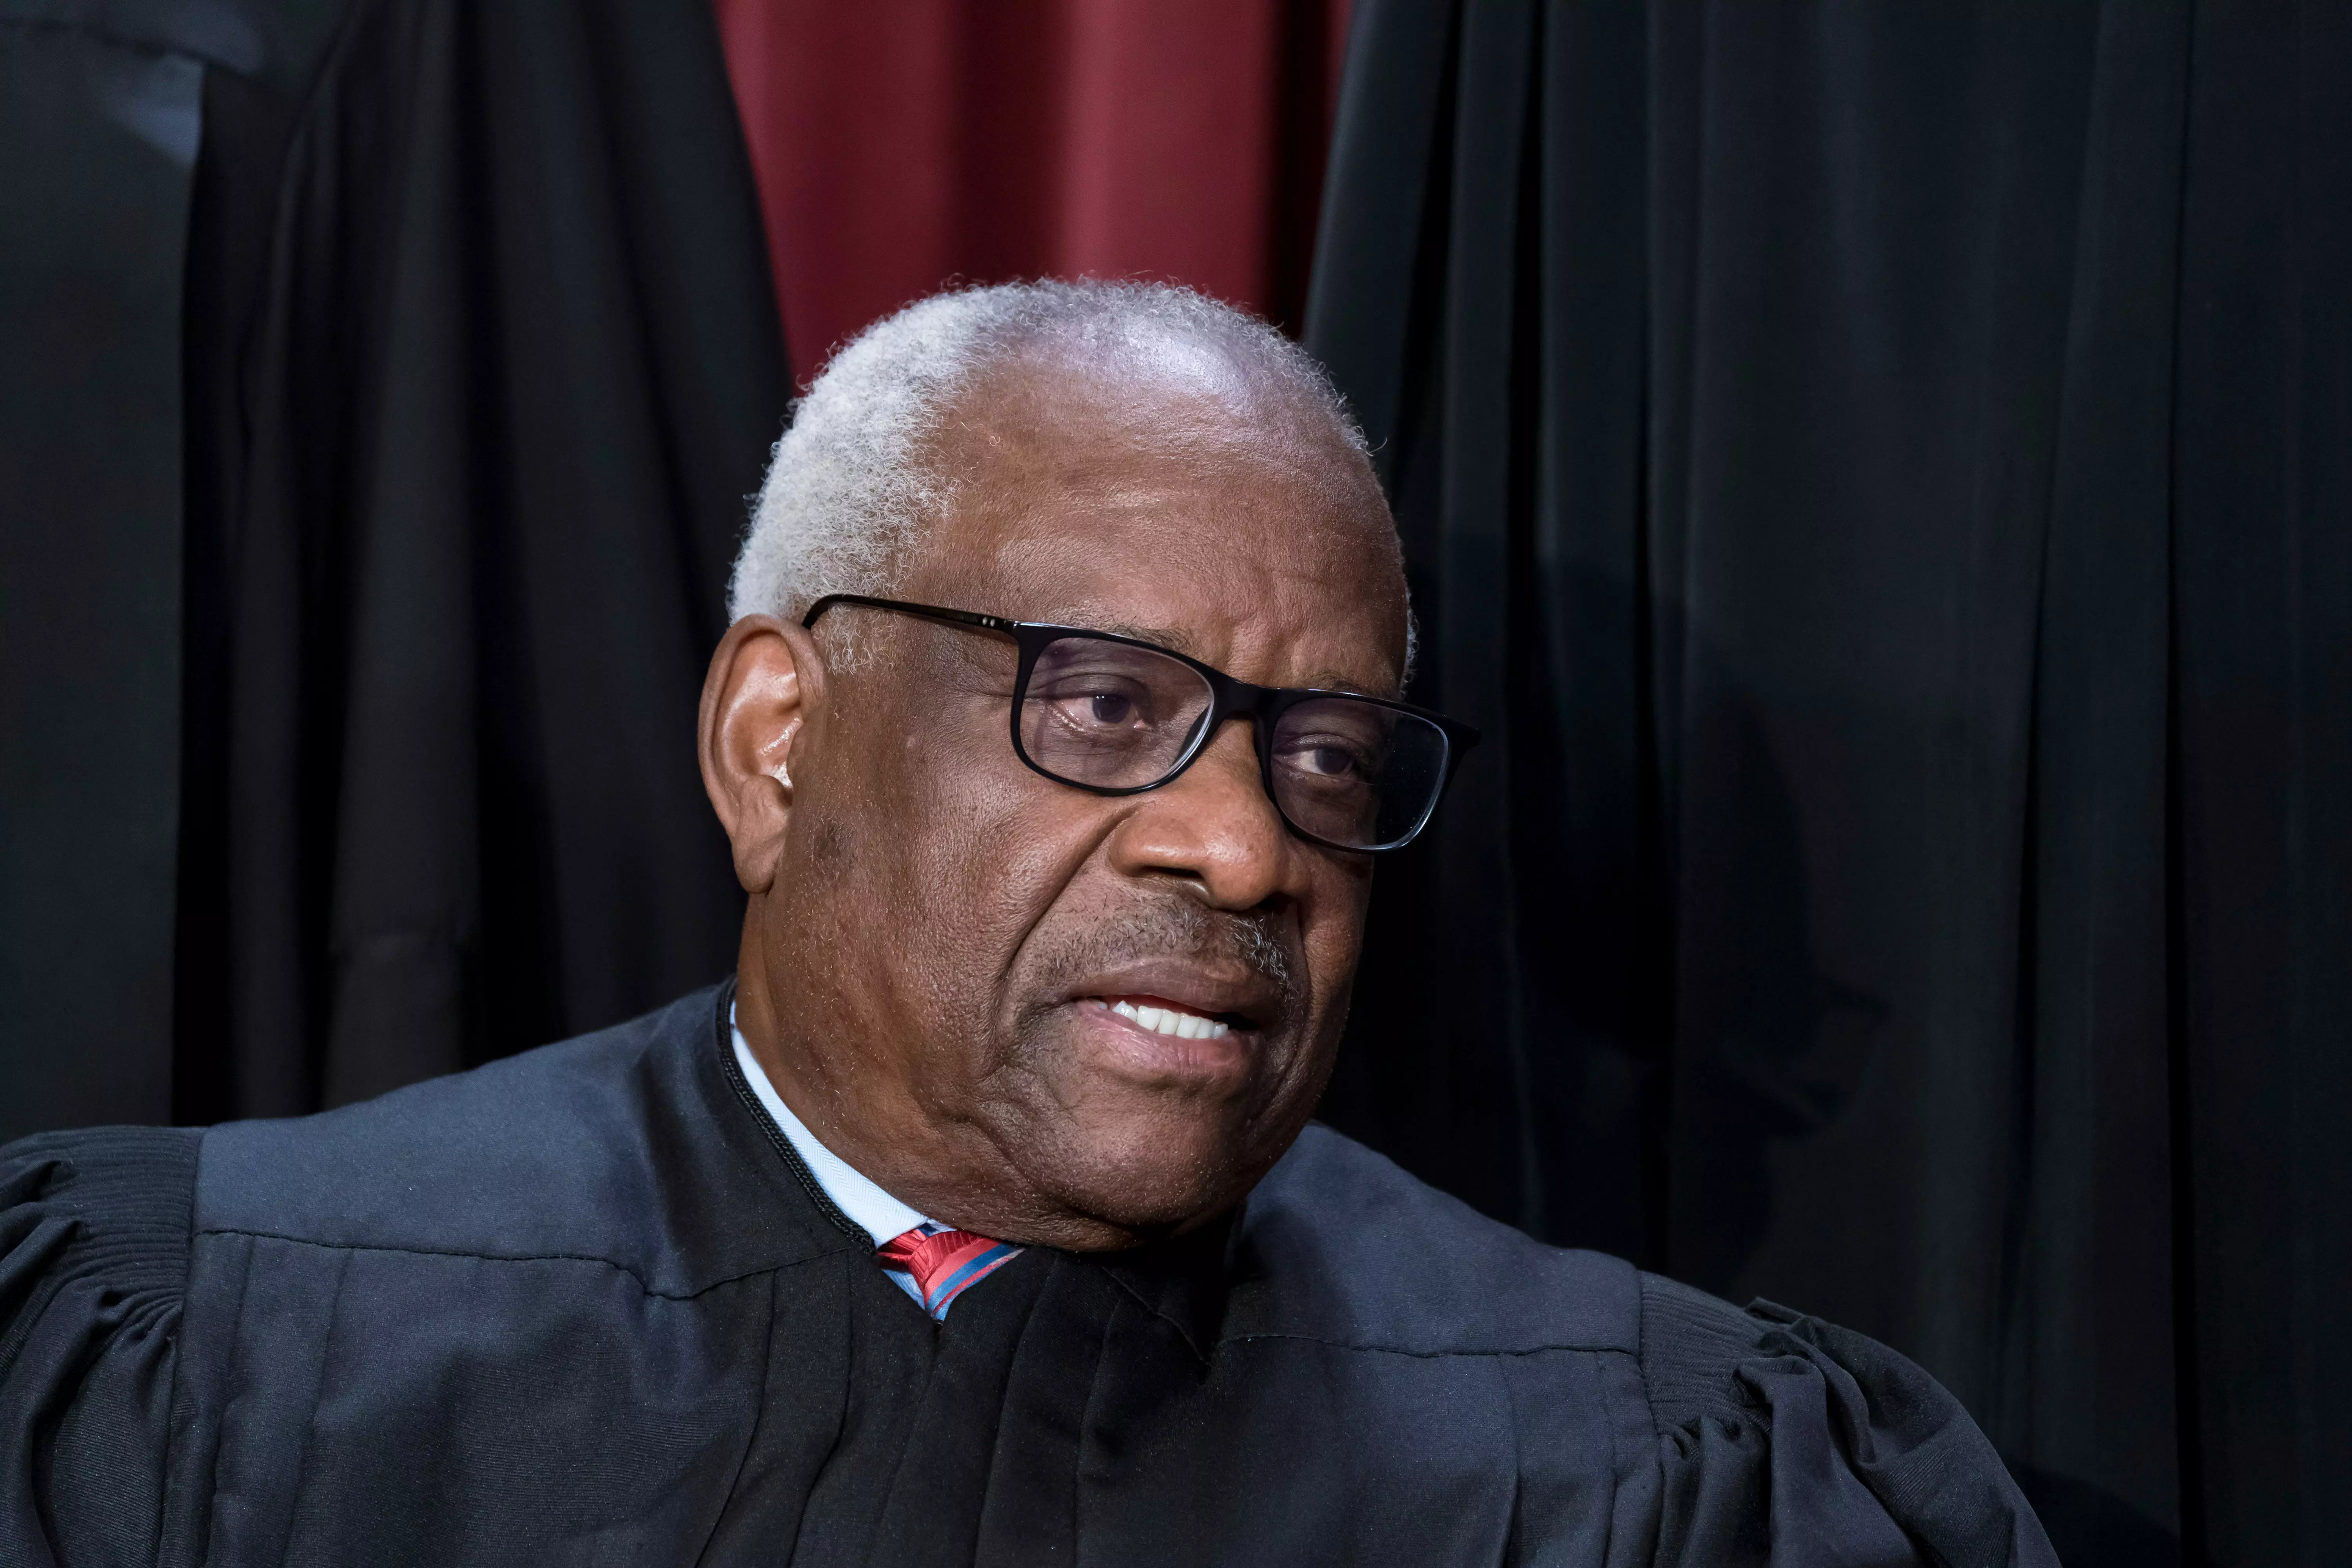 Associate Justice Clarence Thomas has been reporting rental income from a family real estate company that ceased operations more than 15 years ago.